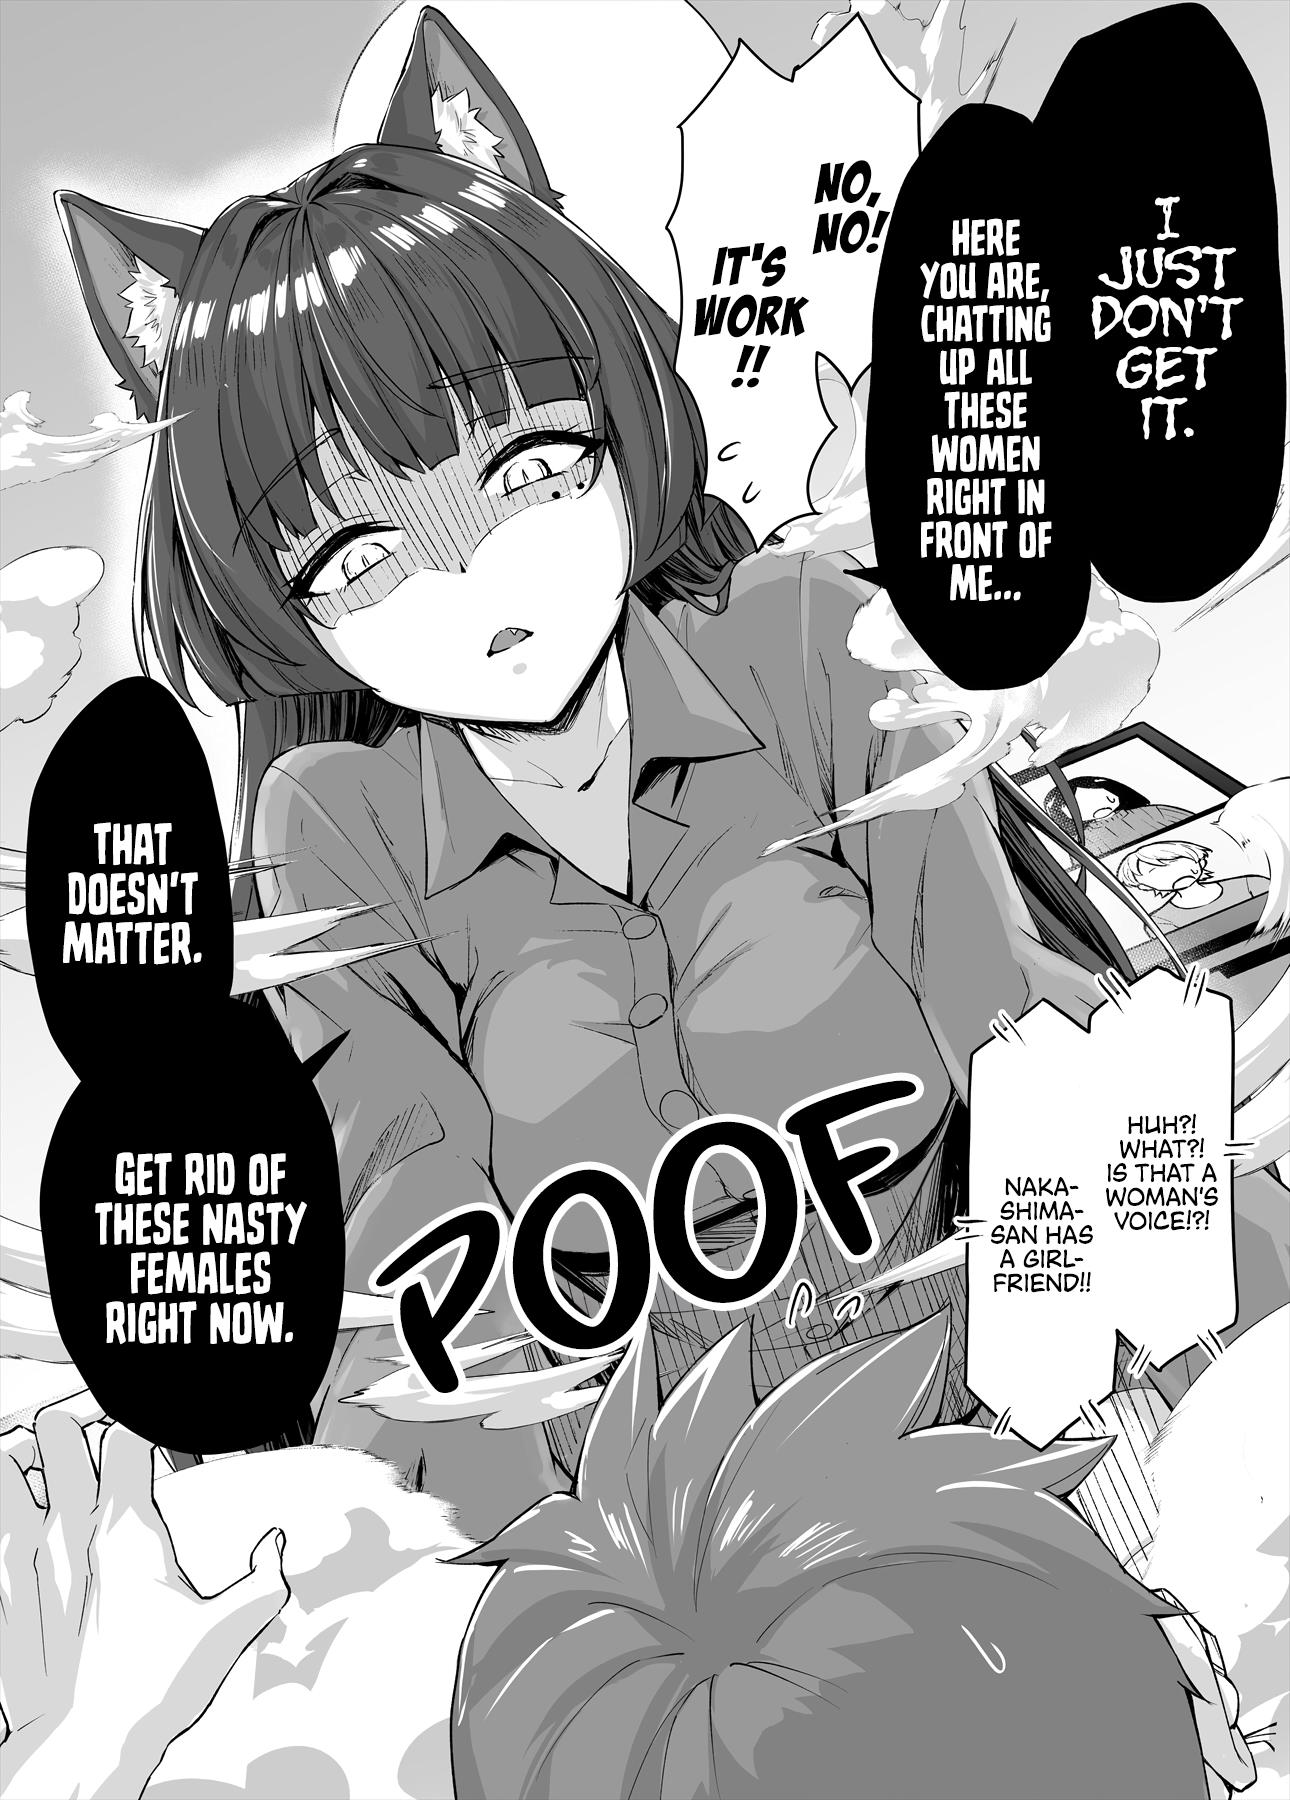 The Yandere Pet Cat Is Overly Domineering - Page 2